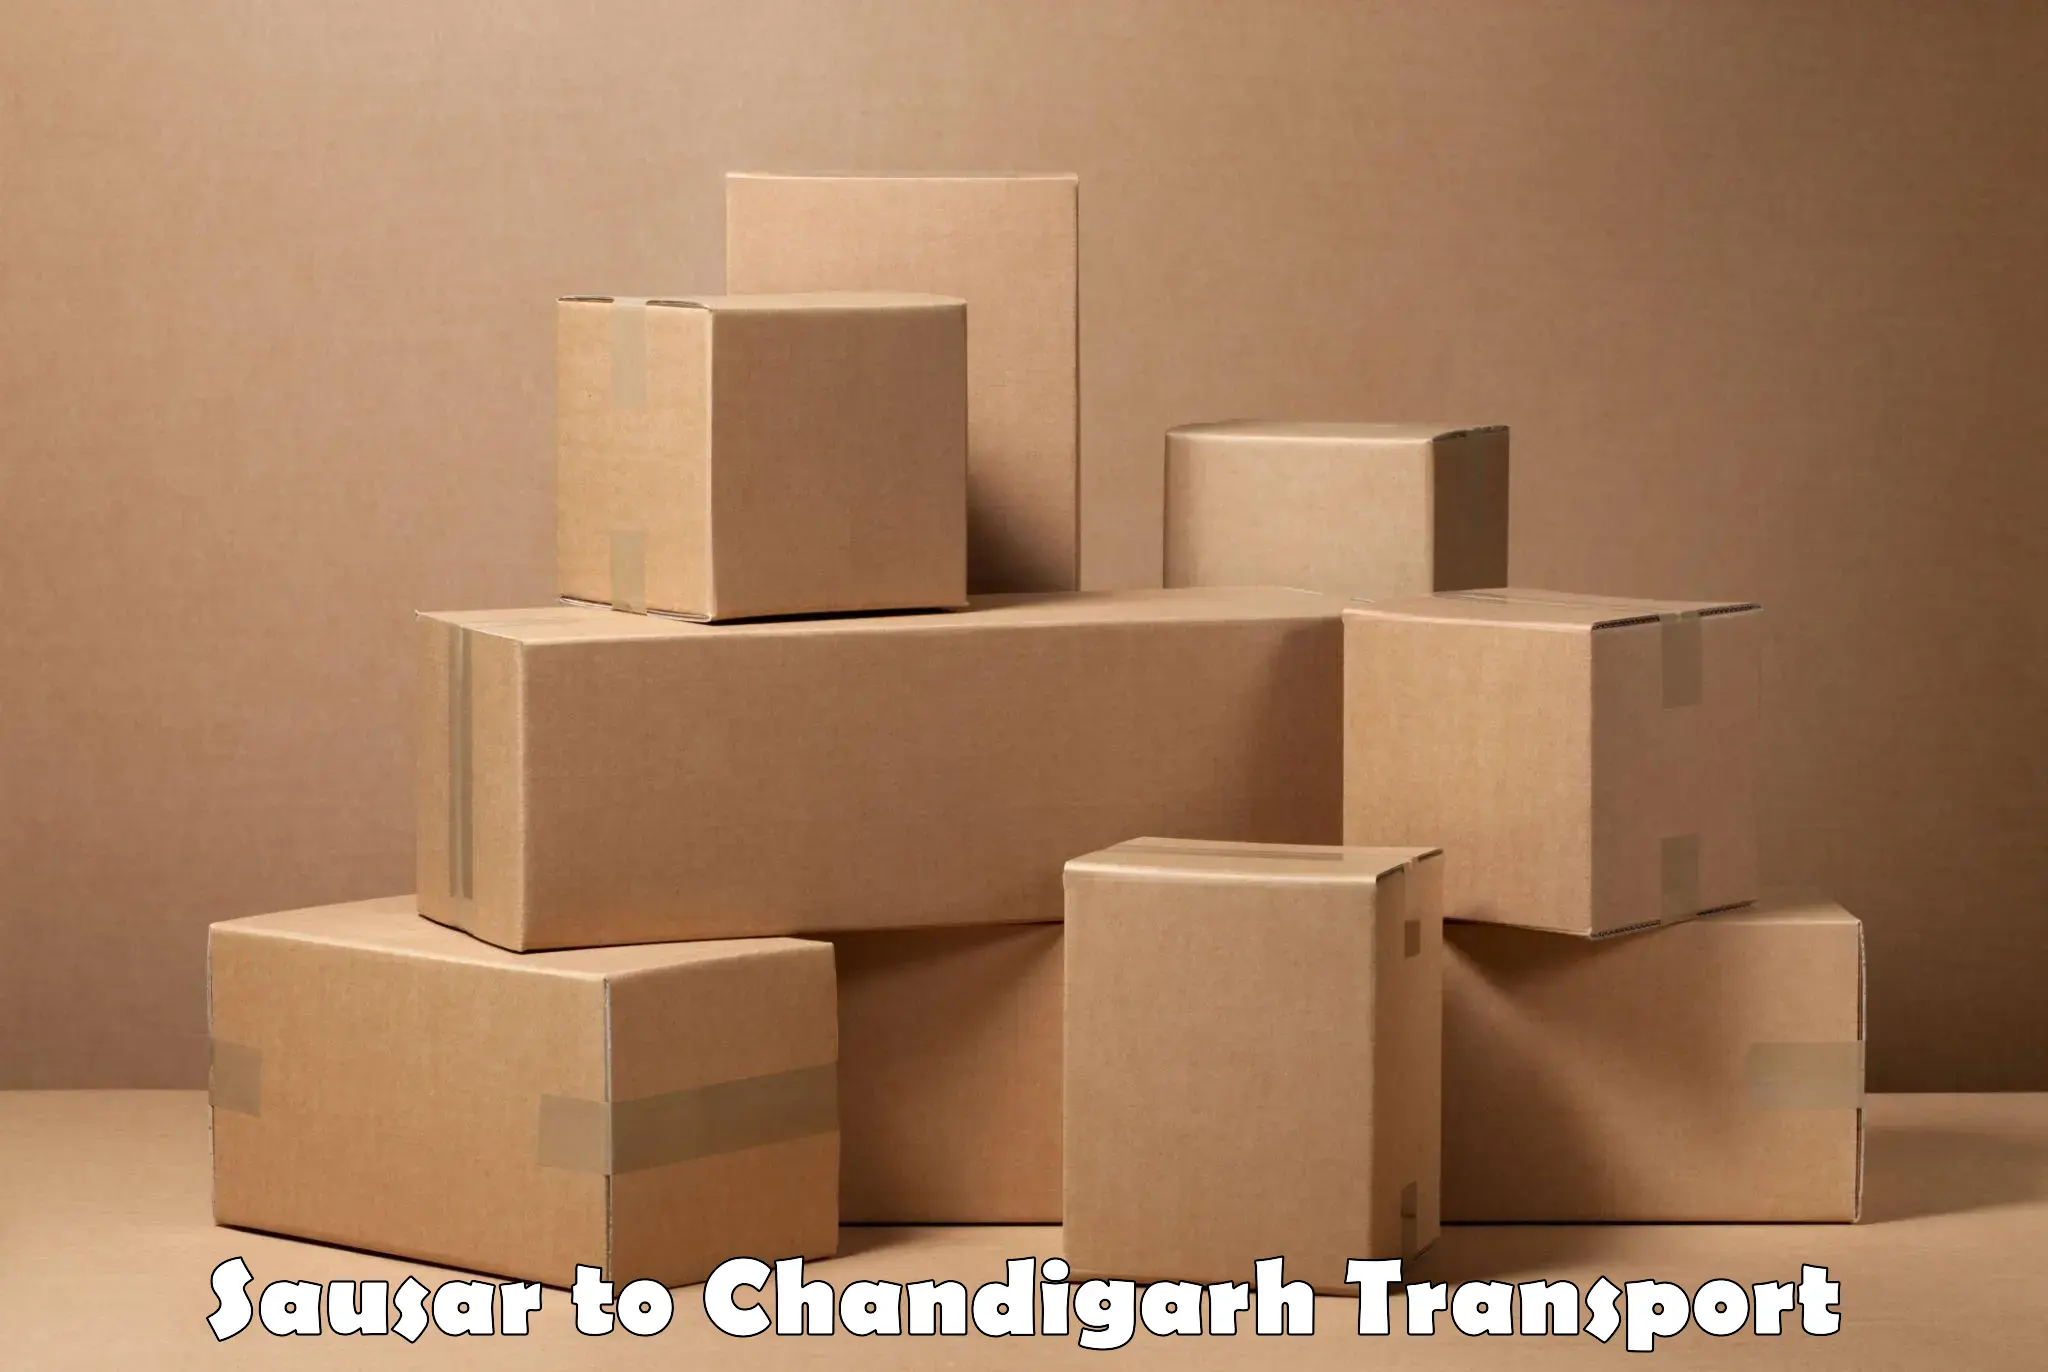 Container transport service Sausar to Chandigarh